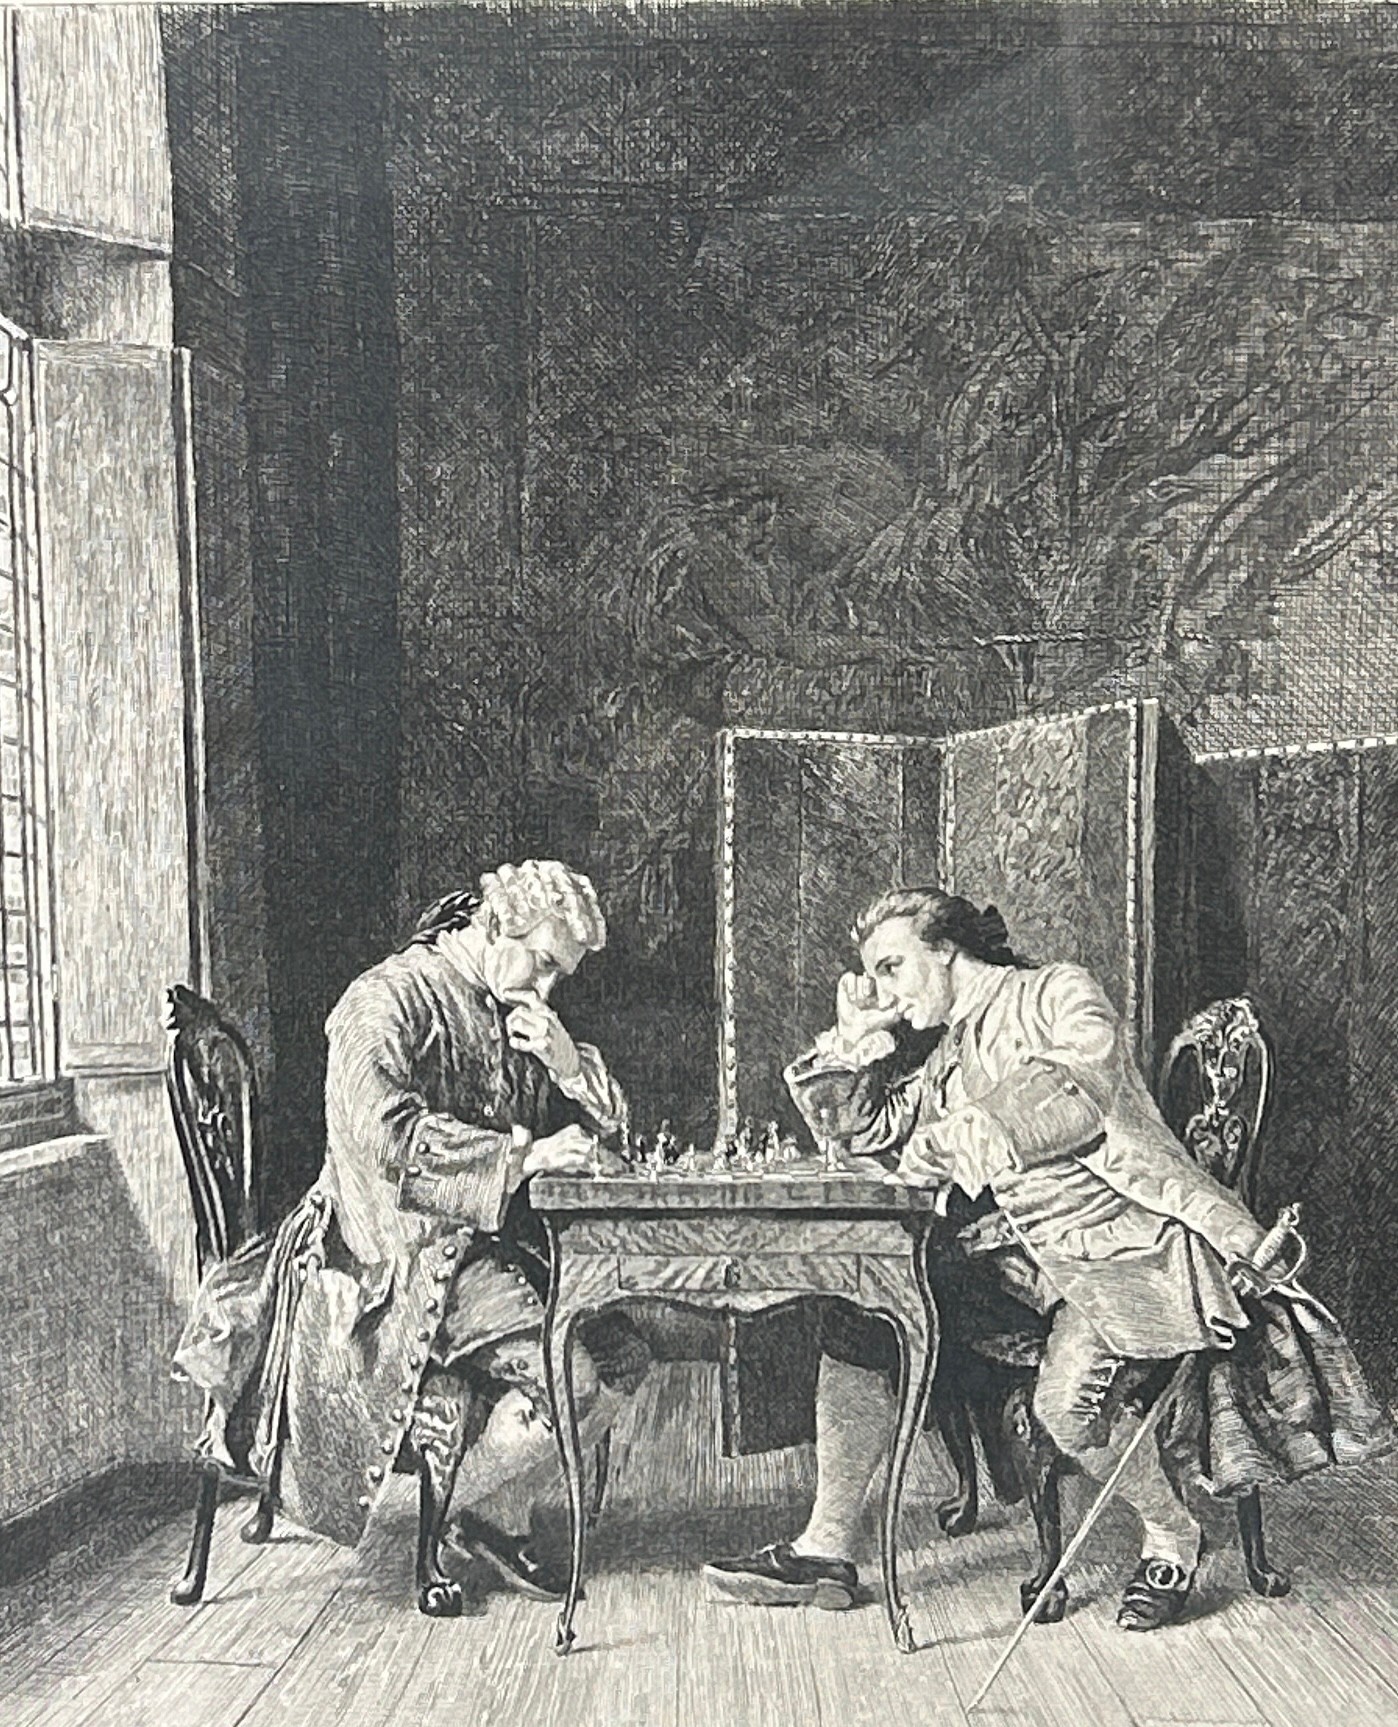 A PRINT OF TWO GENTLEMAN PLAYING CHESS, Signed in pencil bottom right, mounted in a frame and